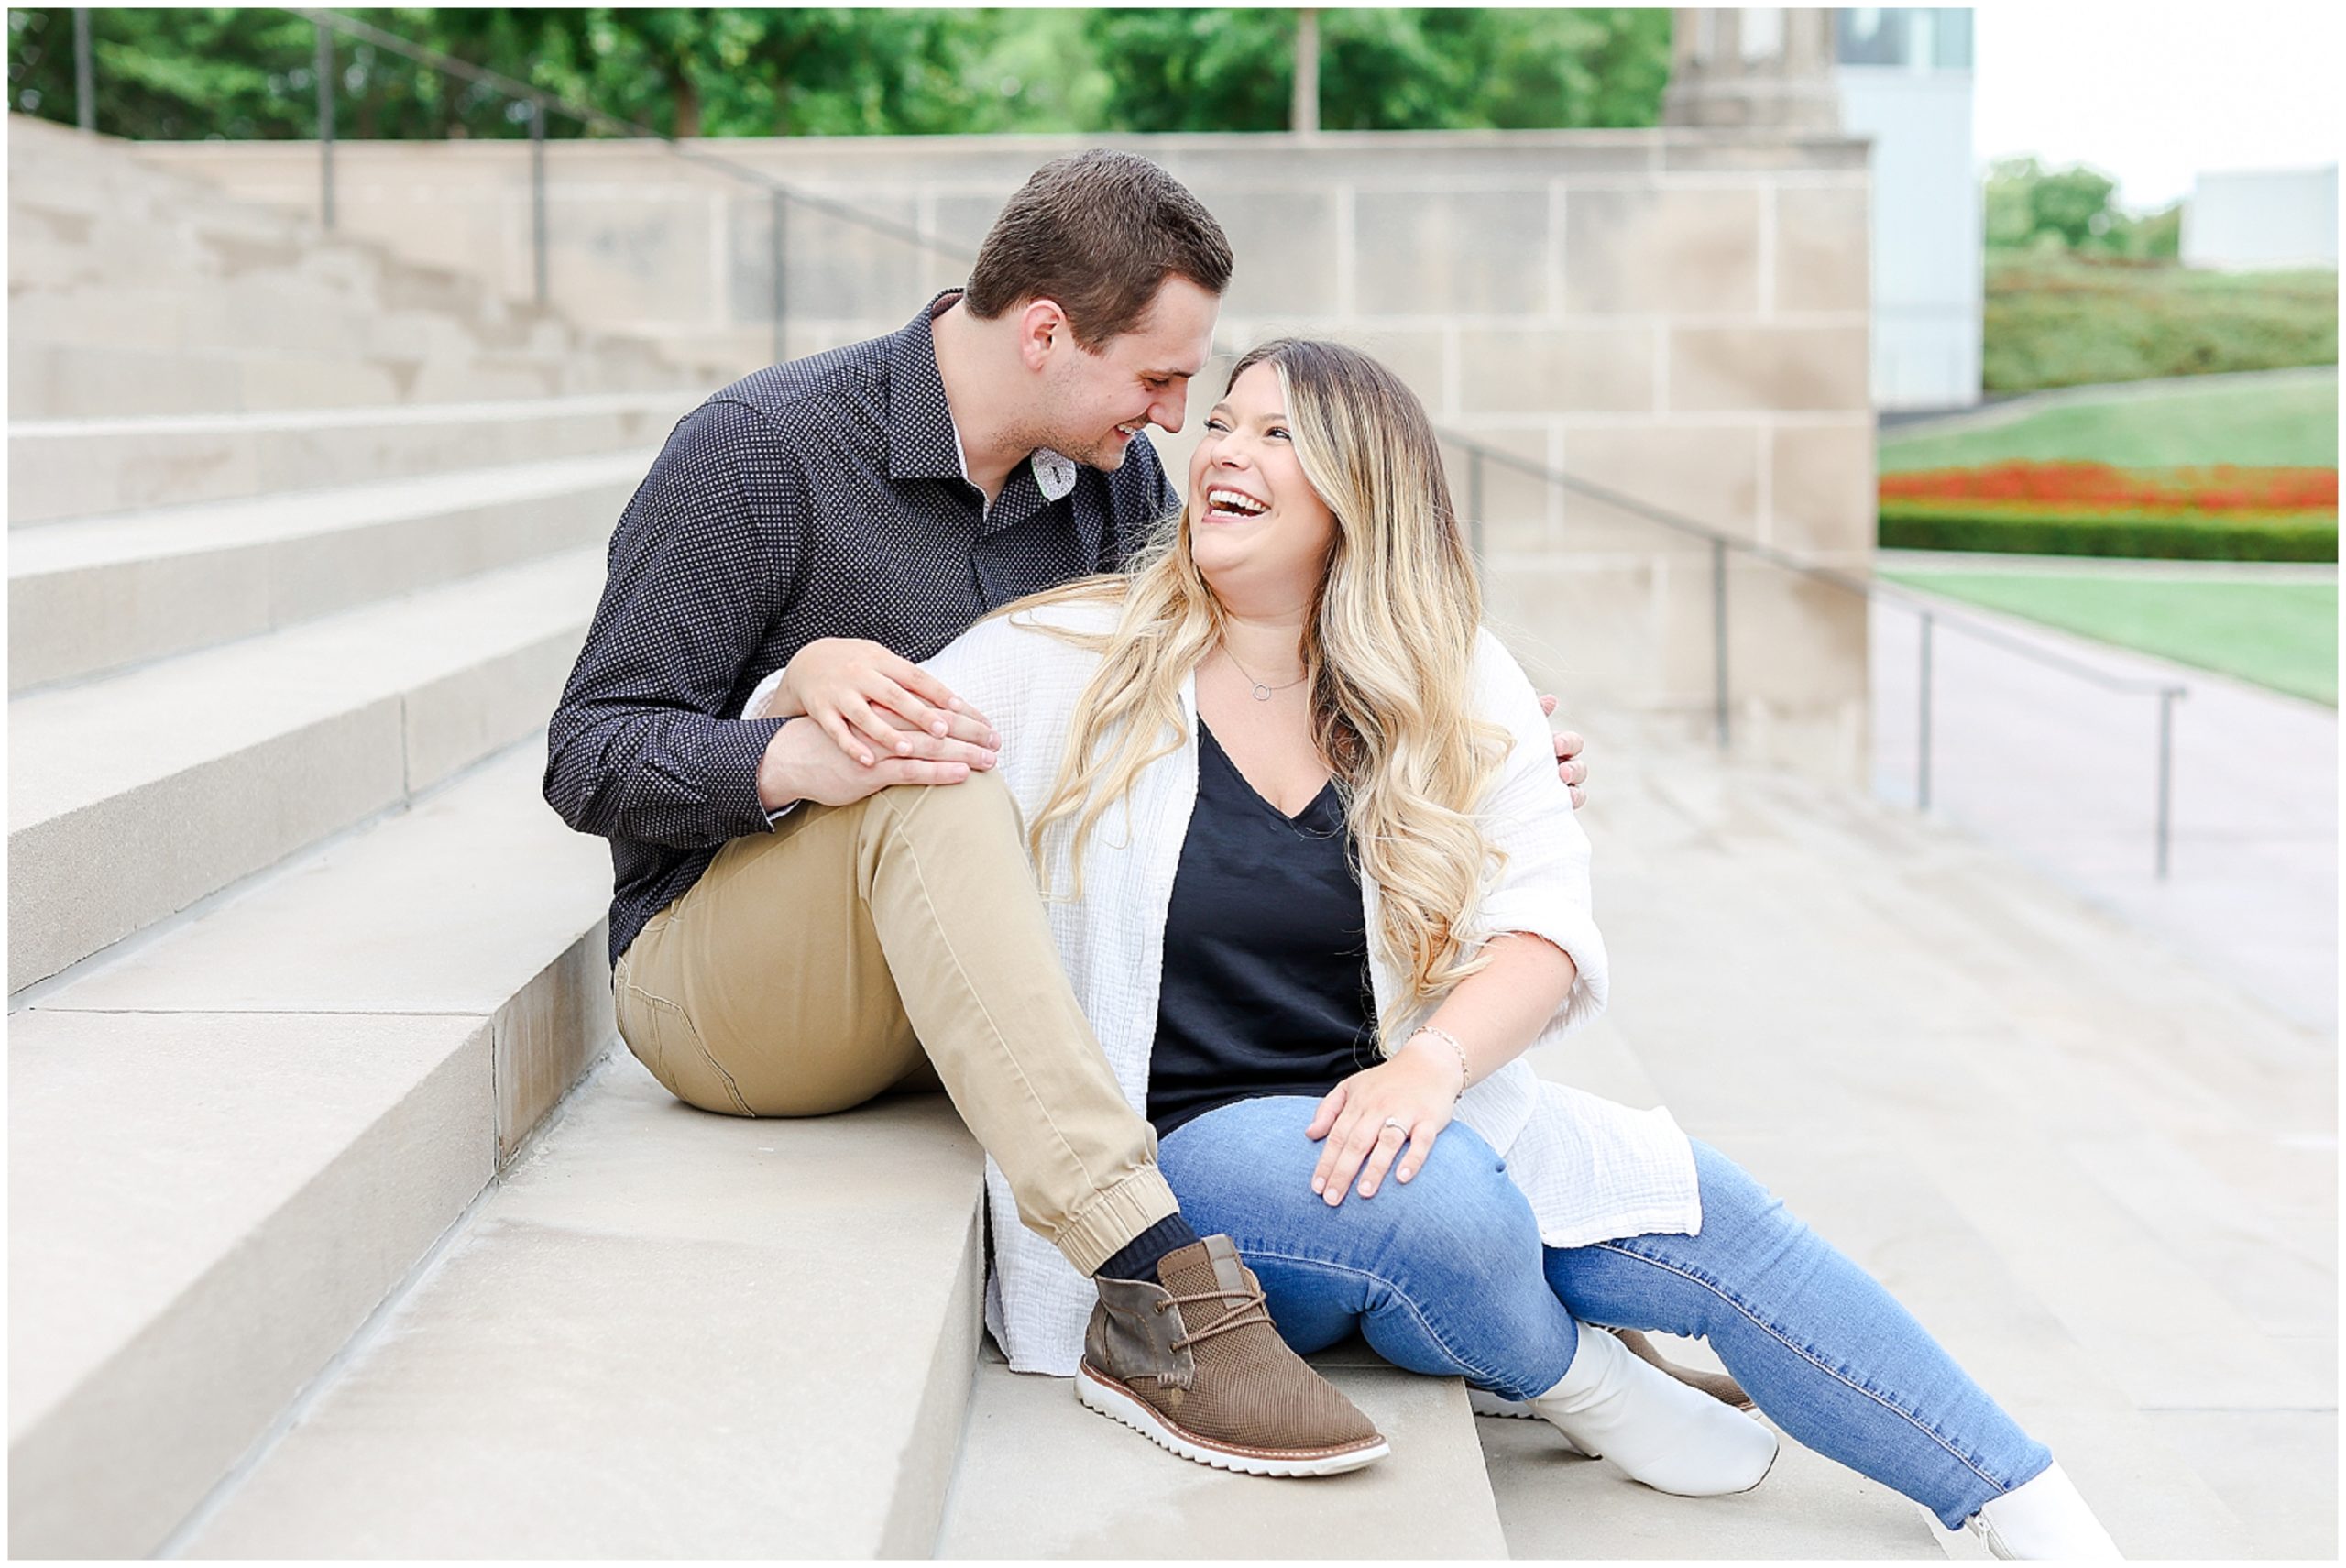 KC Engagement Session for Molly & Austin at the Kansas City Nelson Atkins Museum - Hotel Kansas City Wedding Venue - Where to Get Married in Kansas - Family Portrait Photography - laughing with each other